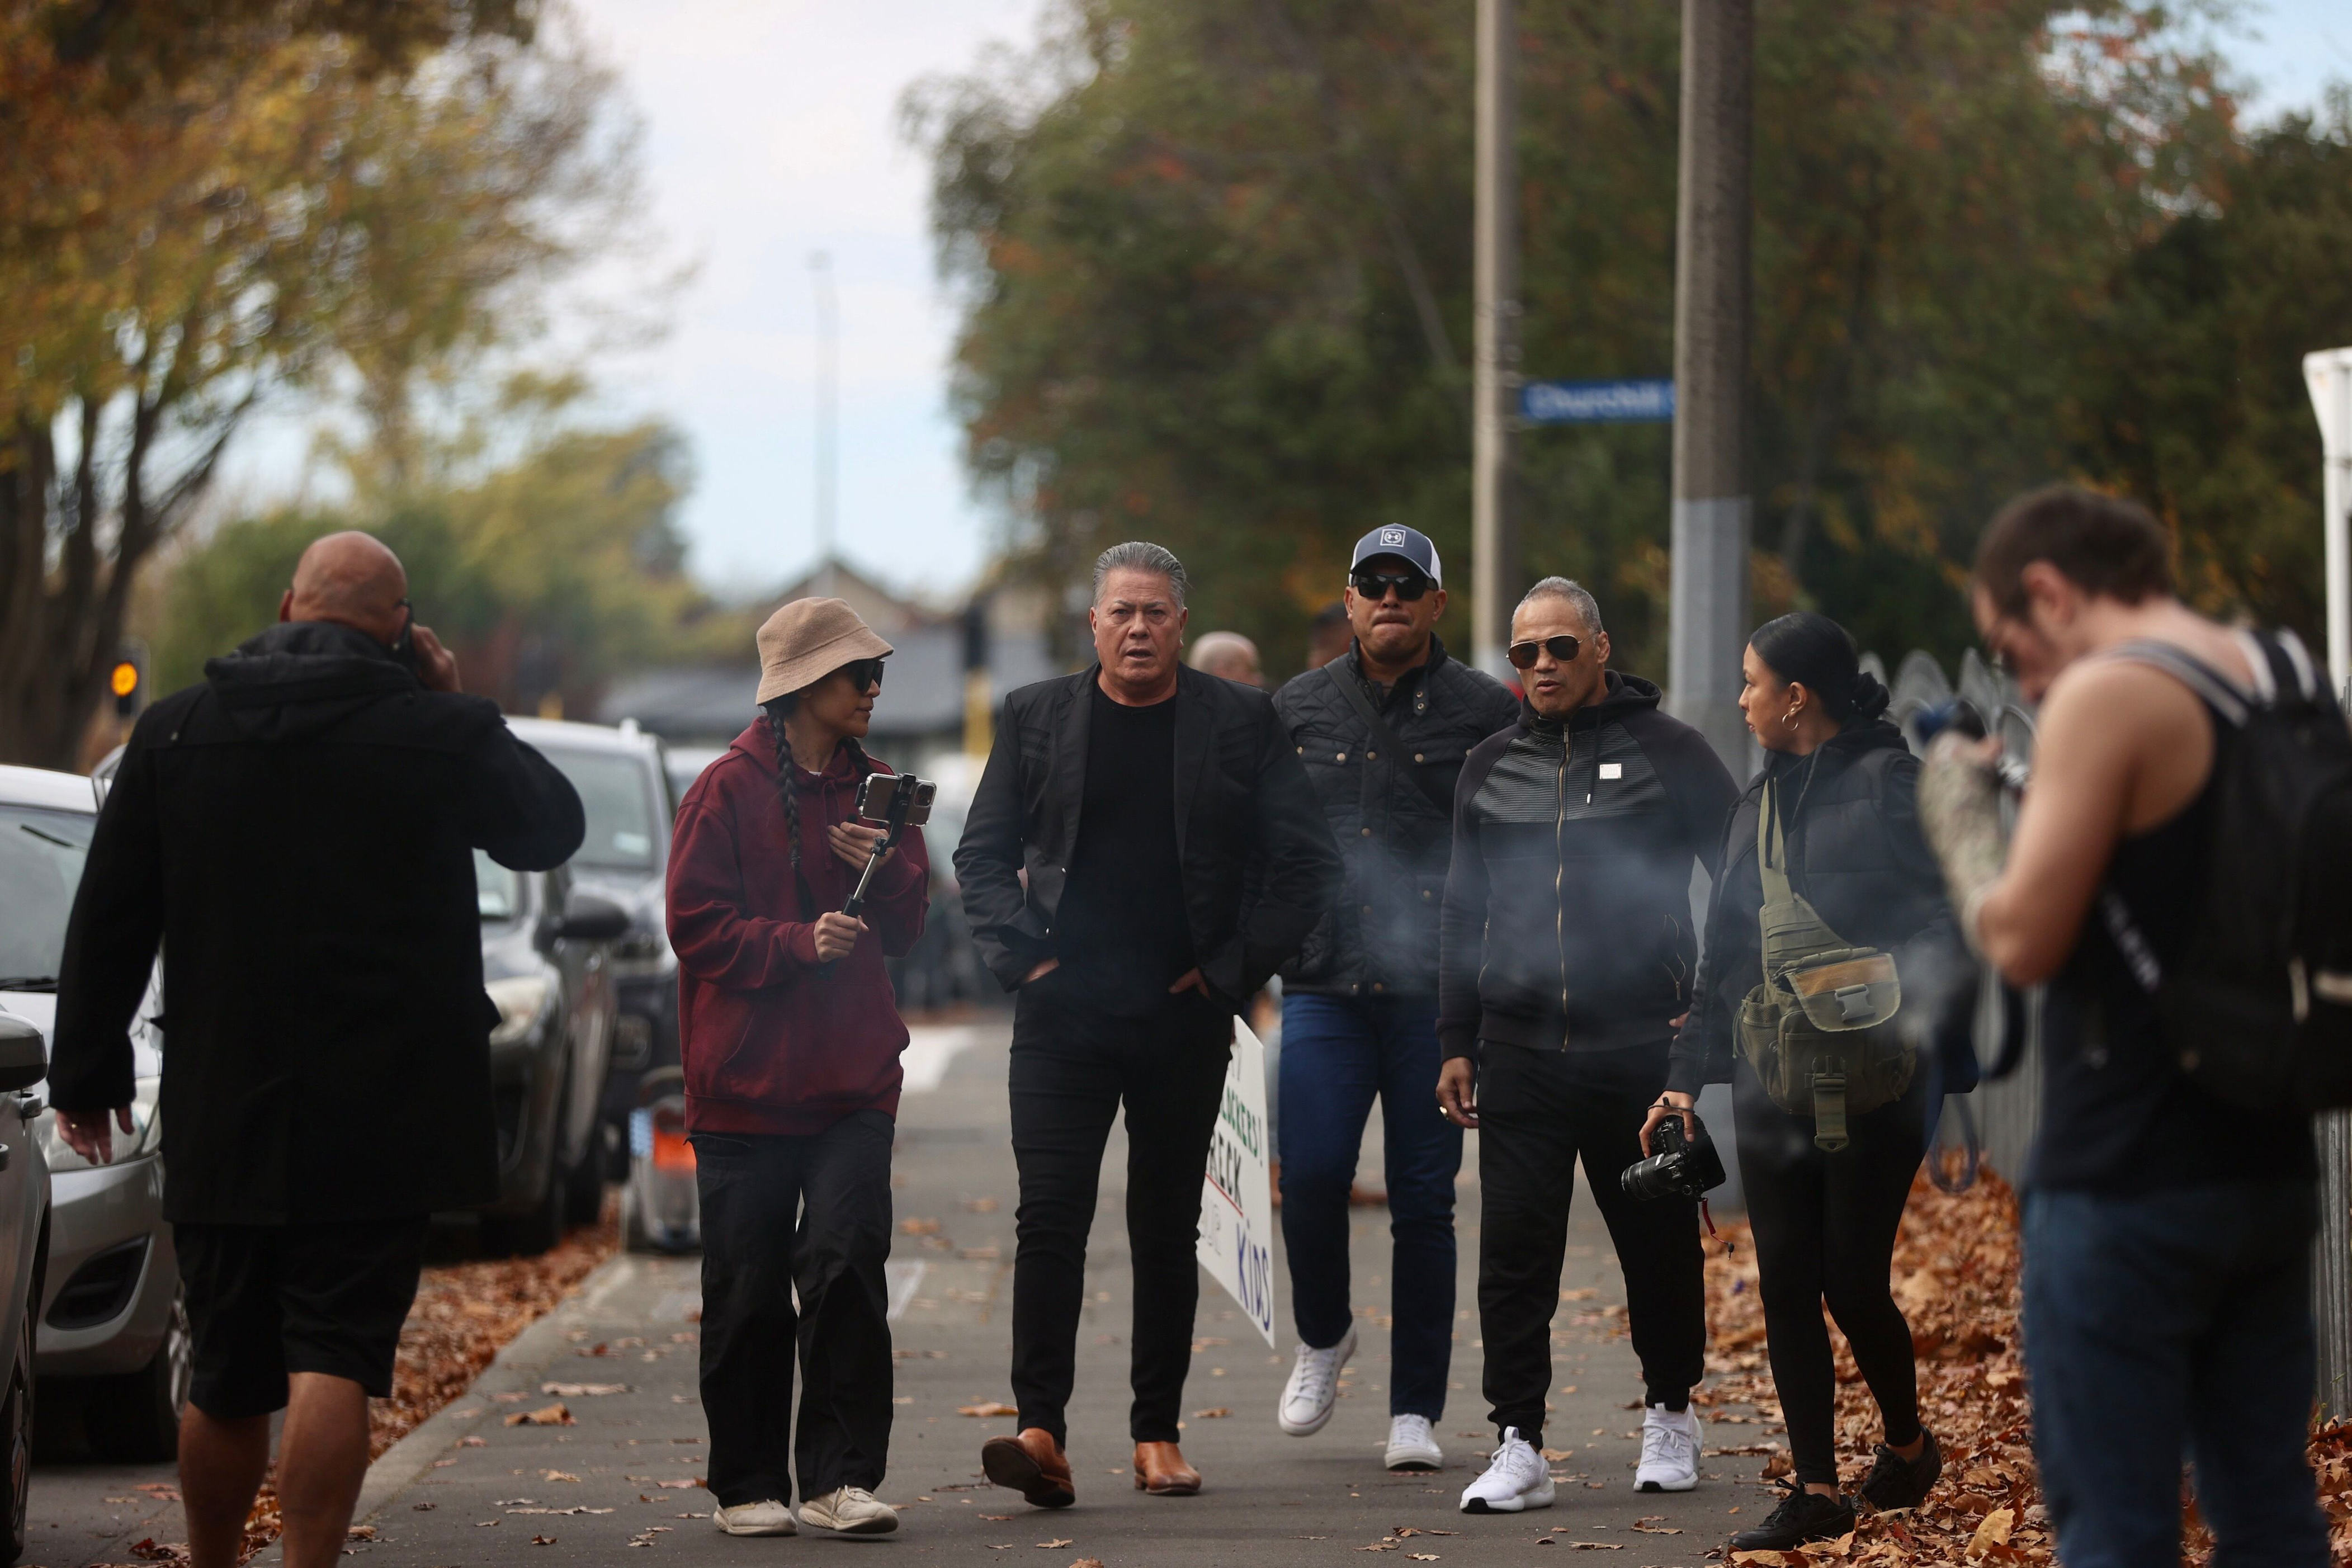 destiny church leader brian tamaki trans protest in christchurch met with counter-protest